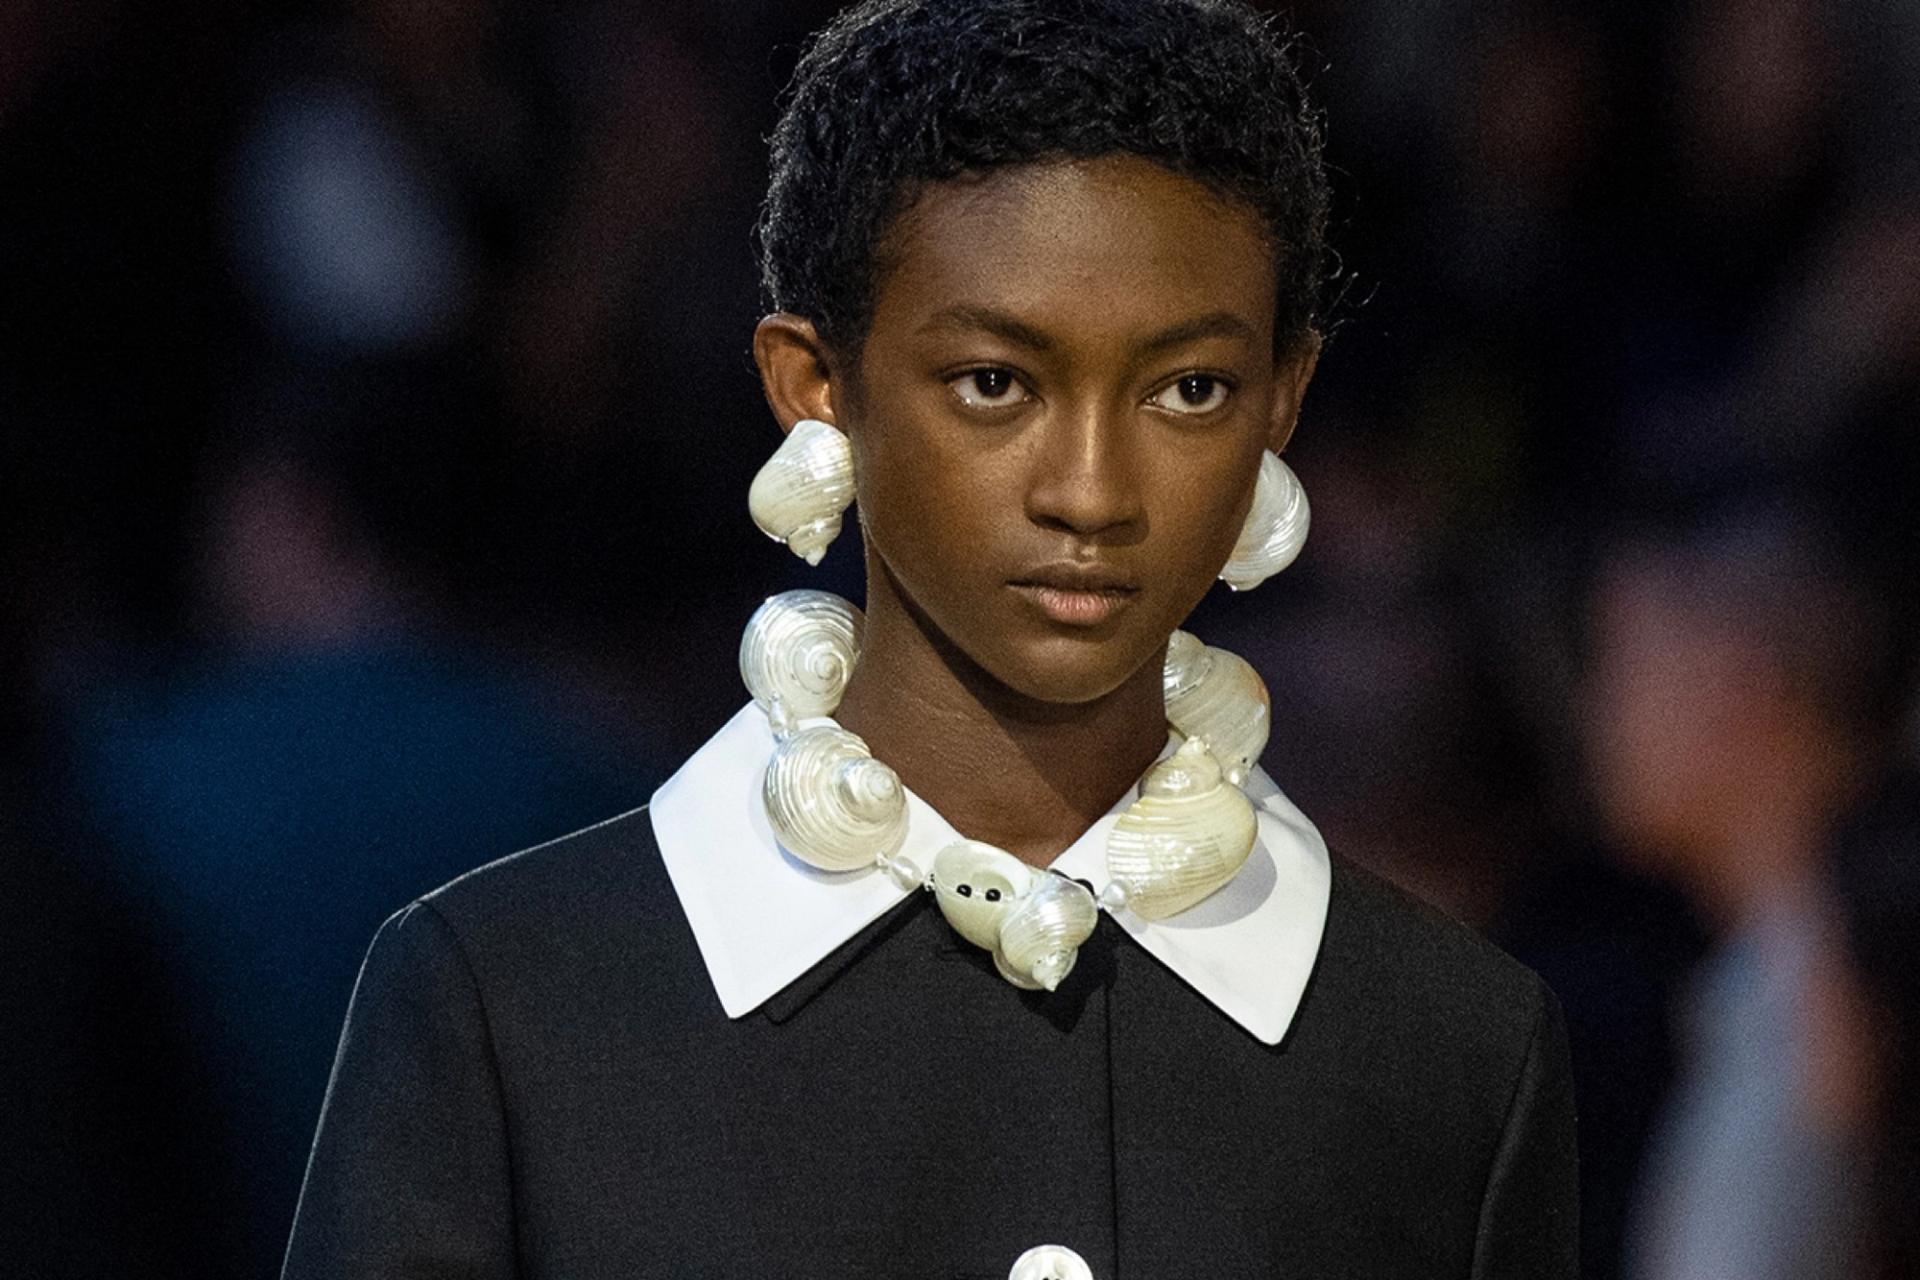 PRADA SPRING/SUMMER 2020: Optimism, Style, and (the) Industry